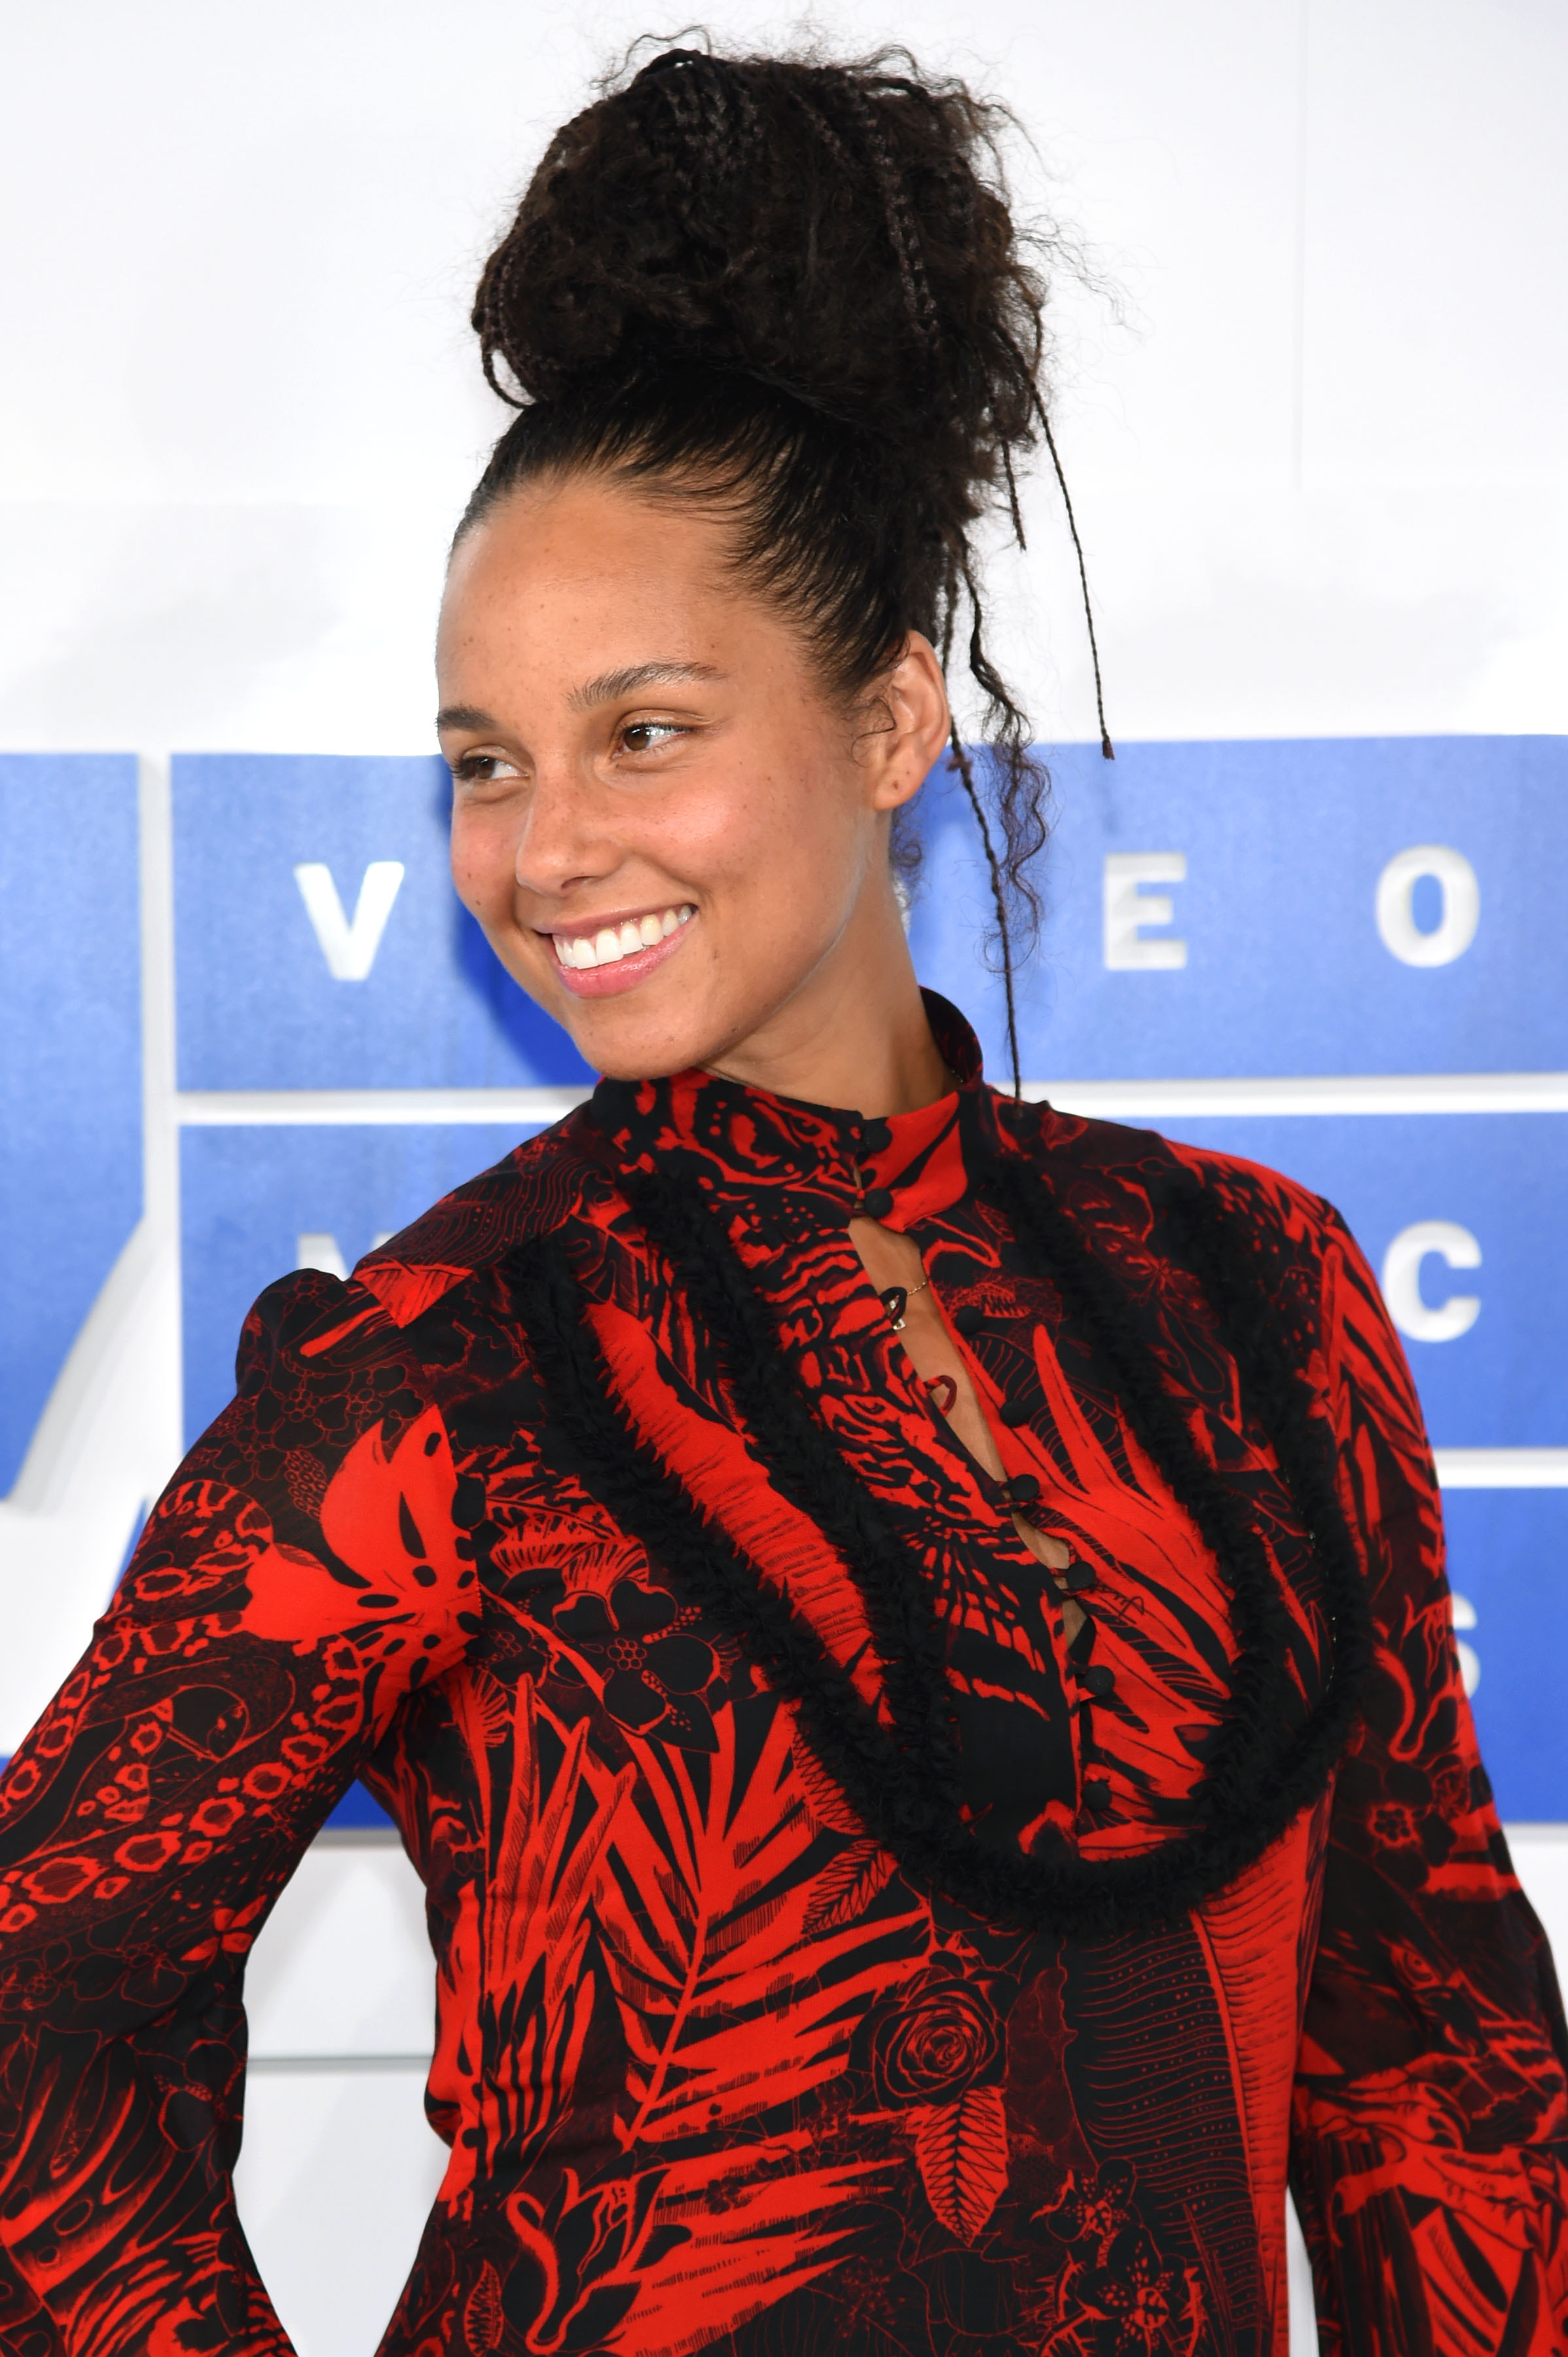 NEW YORK, NY - AUGUST 28: Alicia Keys attends the 2016 MTV Video Music Awards at Madison Square Garden on August 28, 2016 in New York City. Jamie McCarthy/Getty Images/AFP